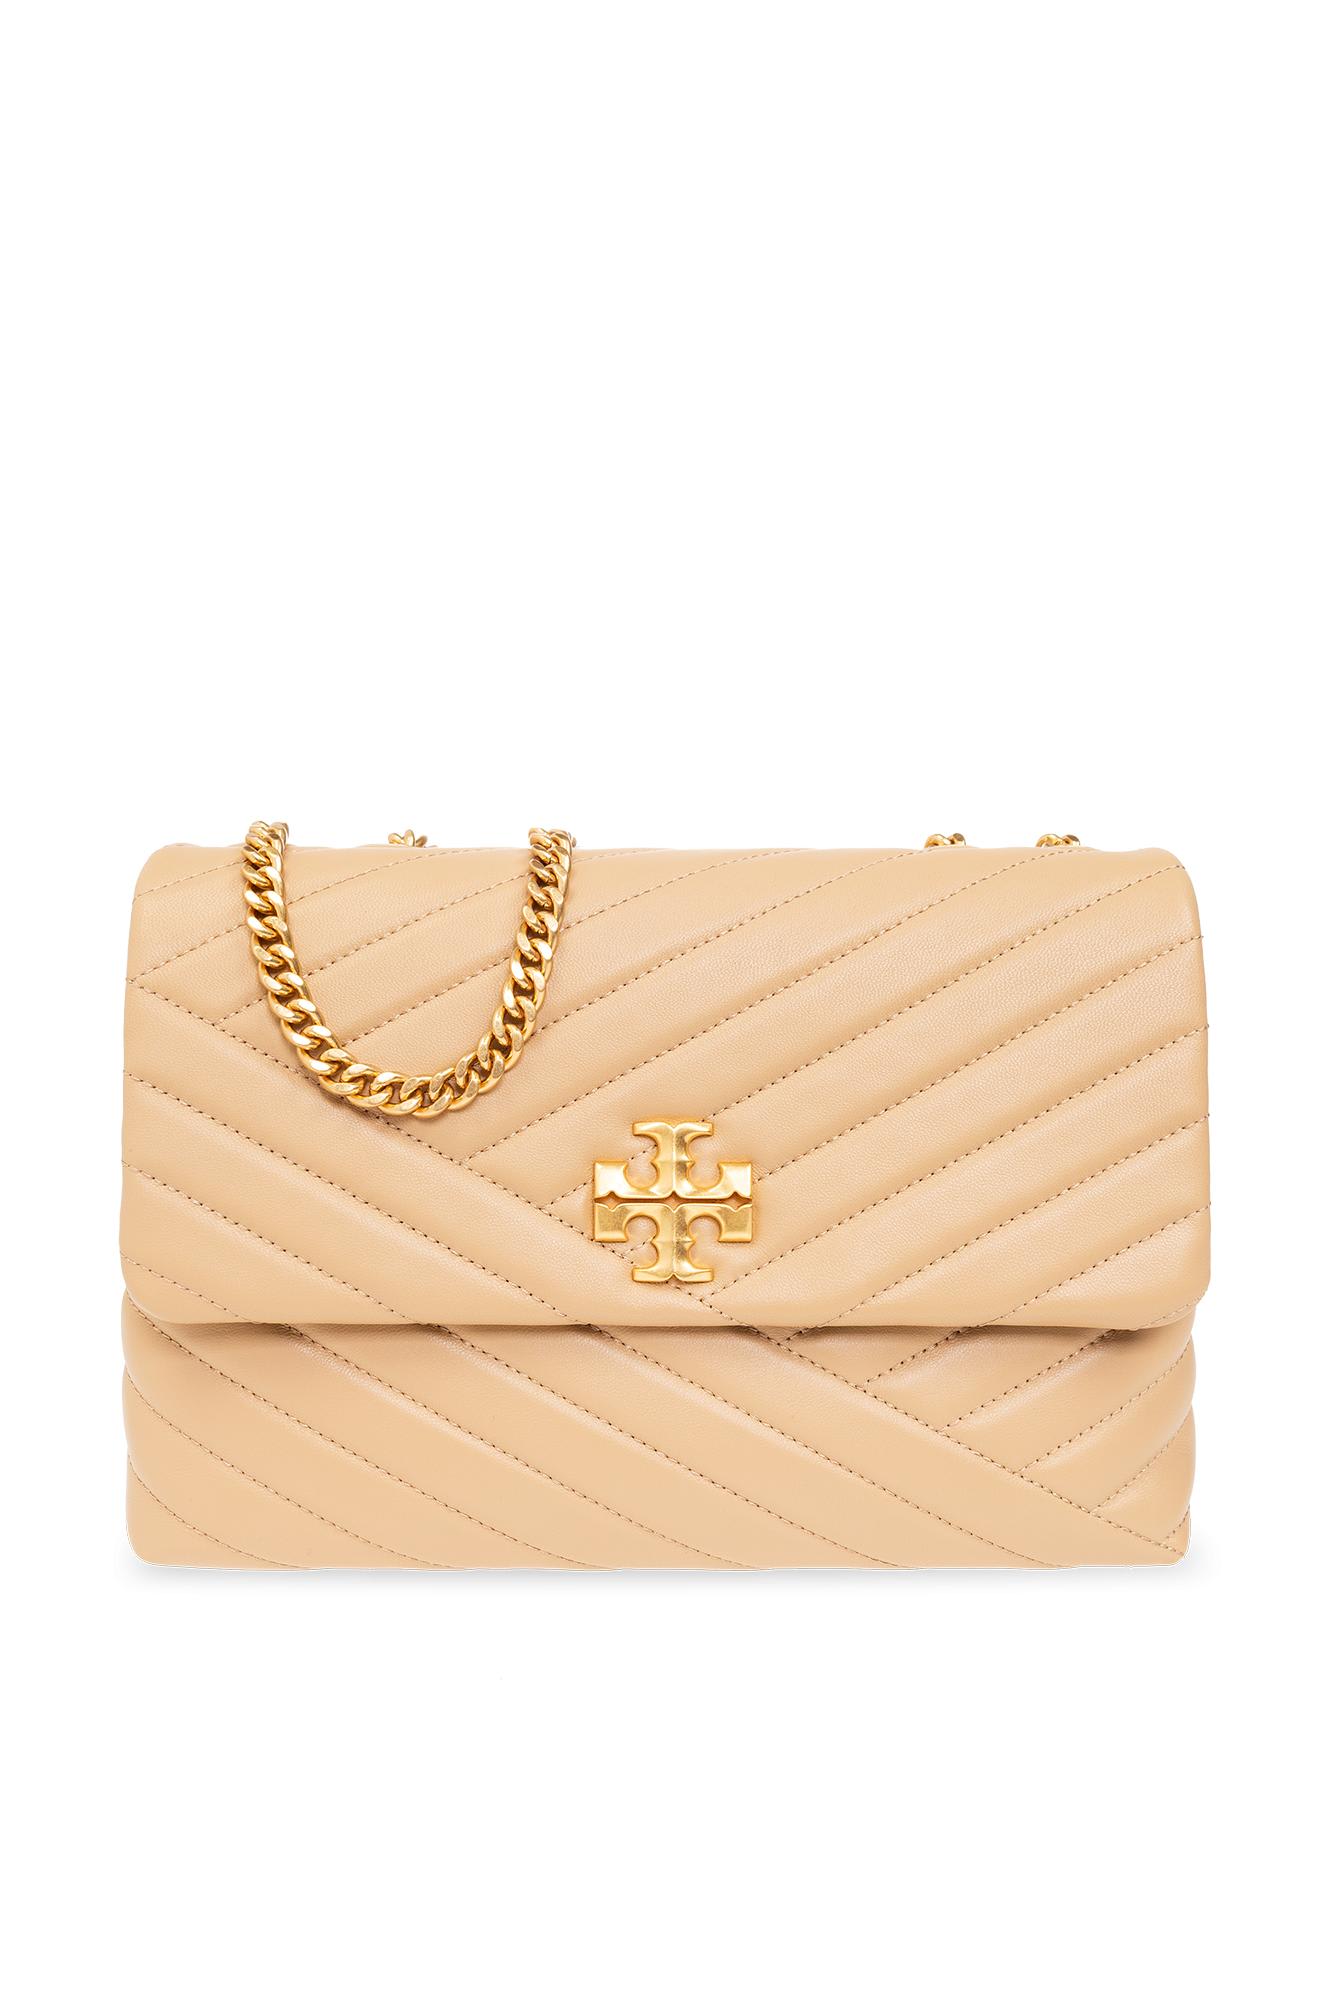 Tory Burch Kira Quilted Shoulder Bag In Beige